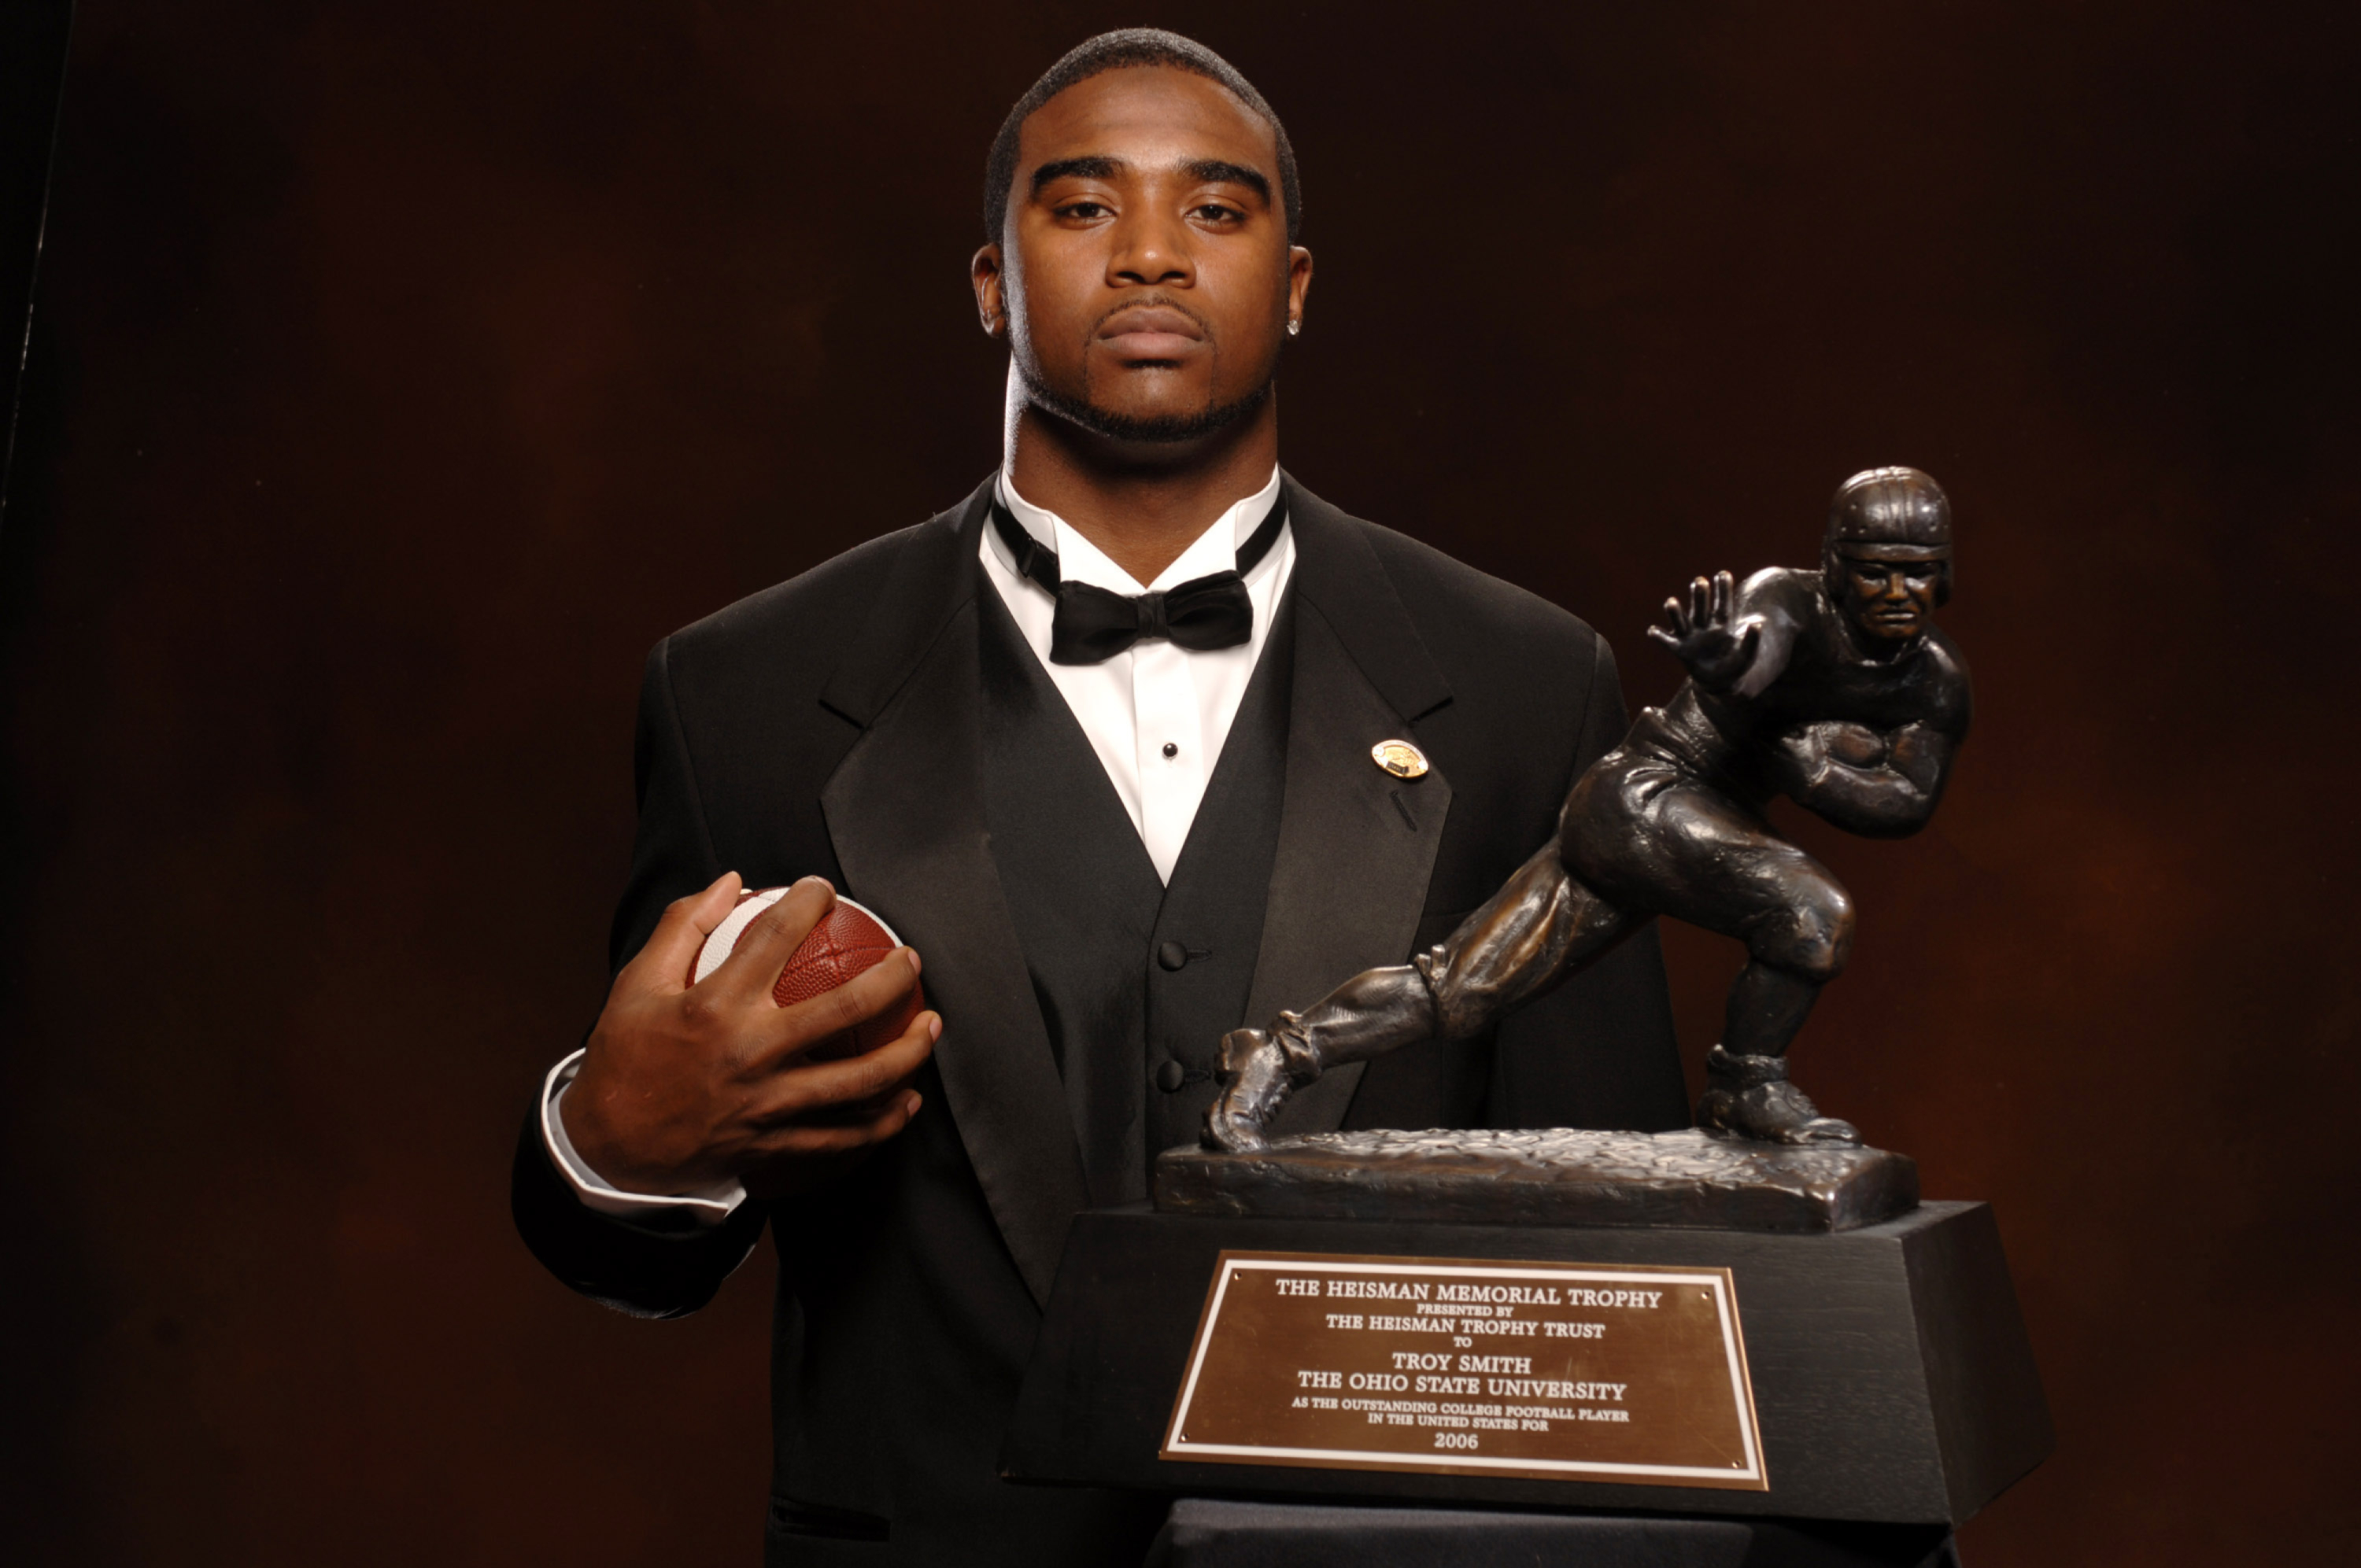 Troy Smith was a legend with the Ohio State Buckeyes as he ultimately won a Heisman. He had some bad luck during his NFL career, though.